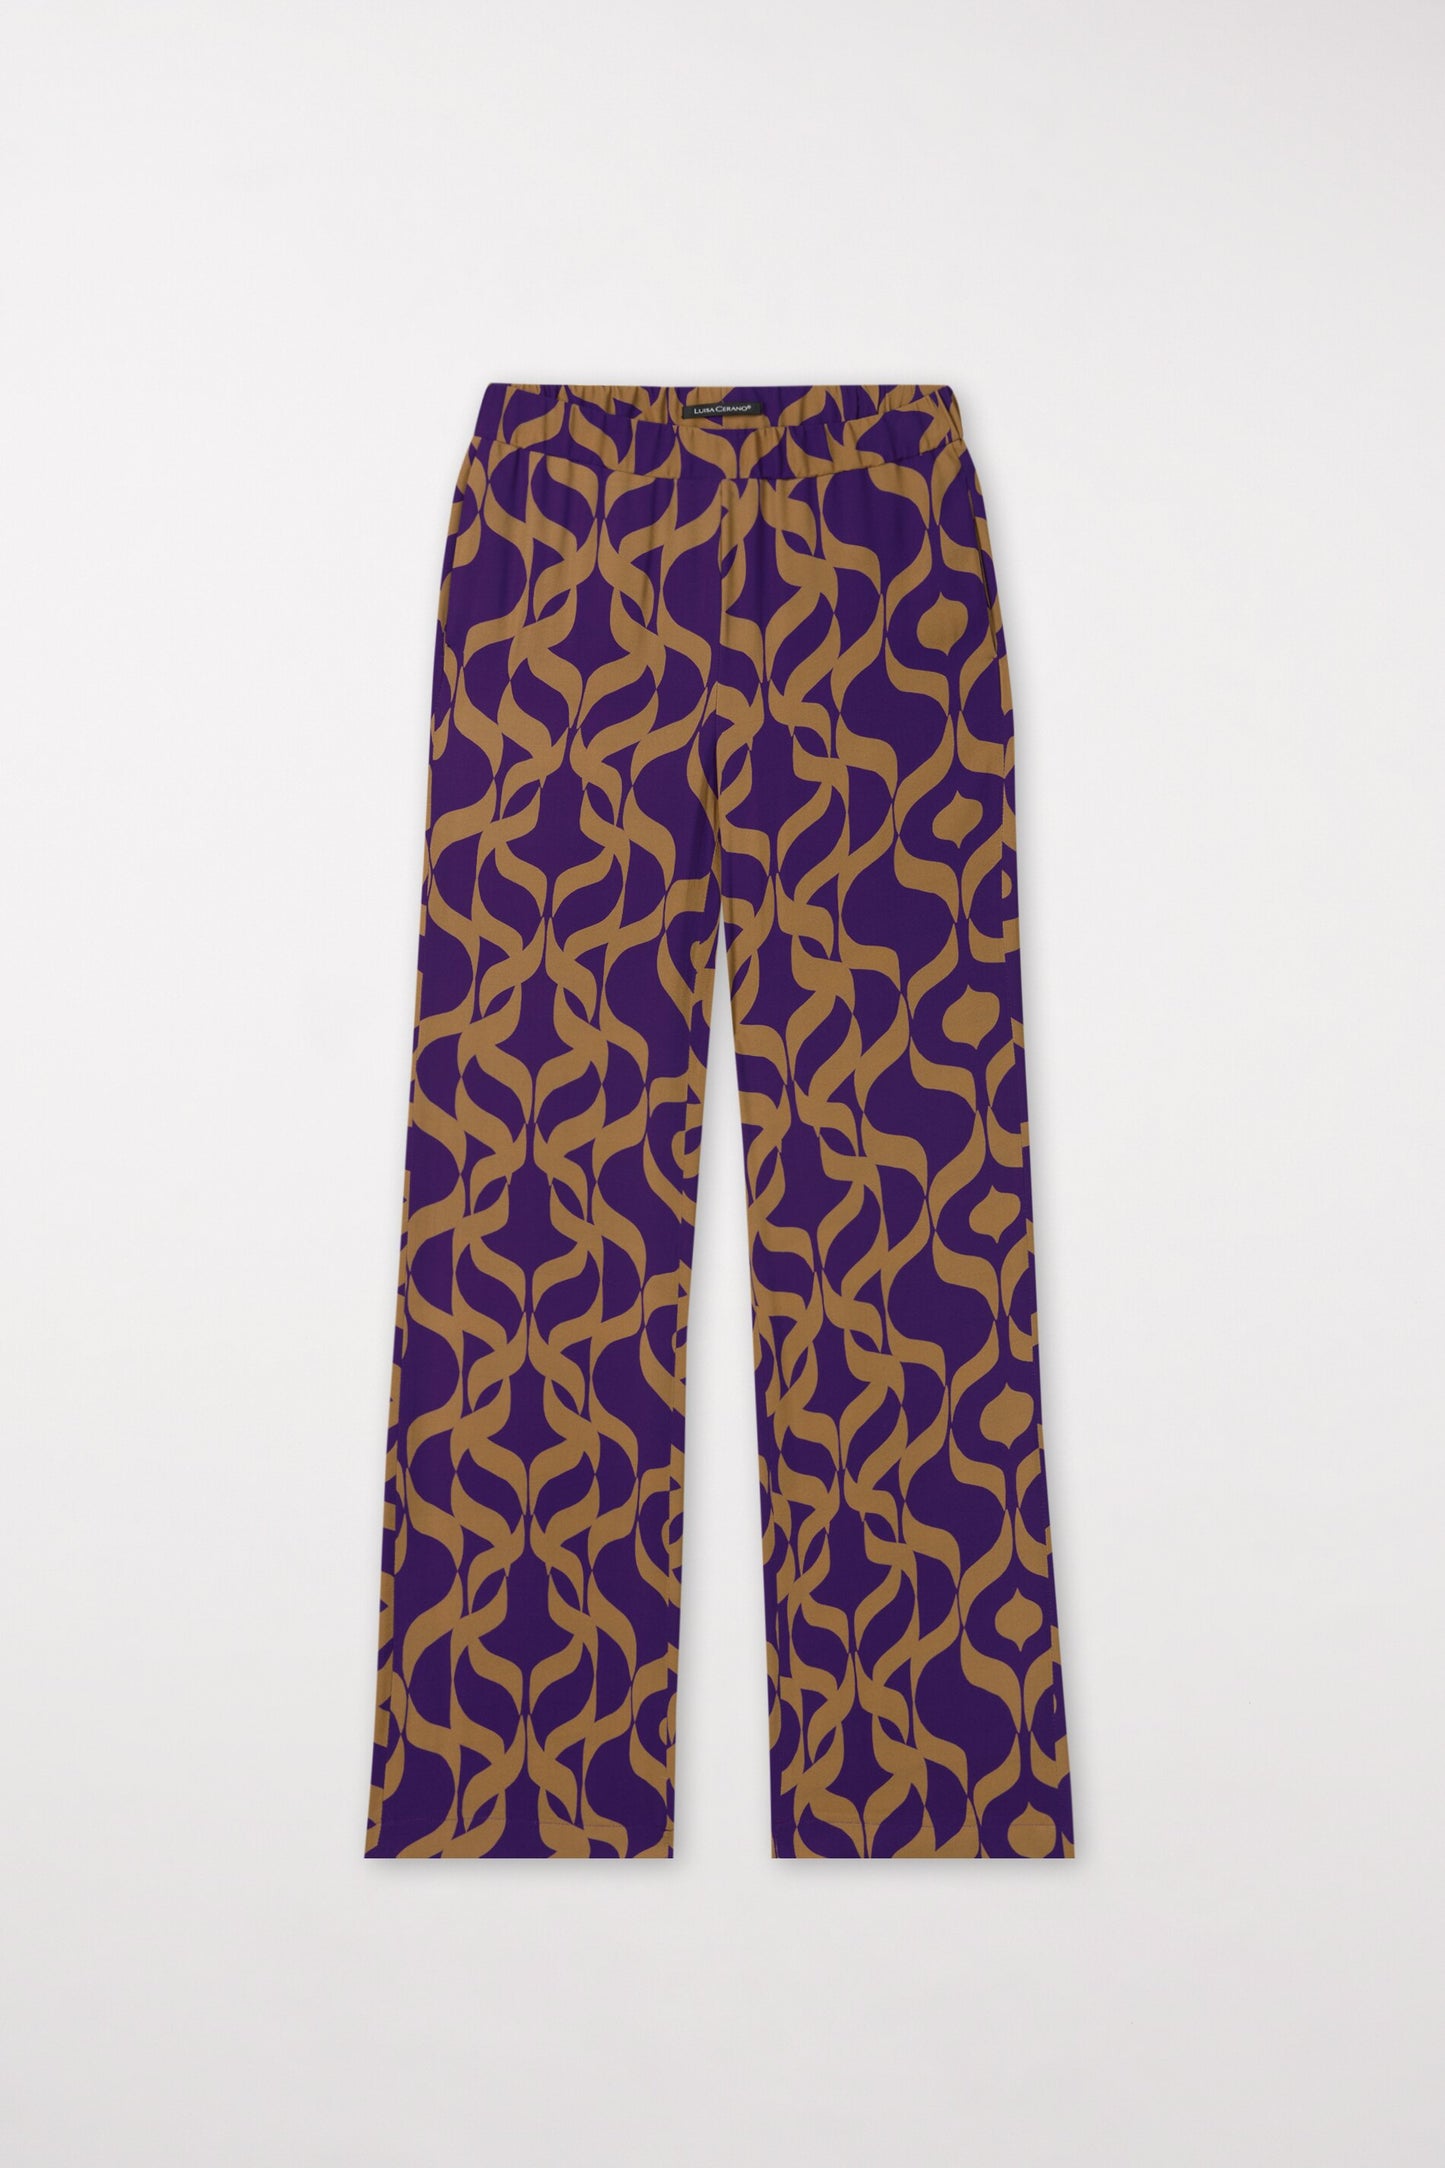 Wide leg Pants with a graphic inspired print